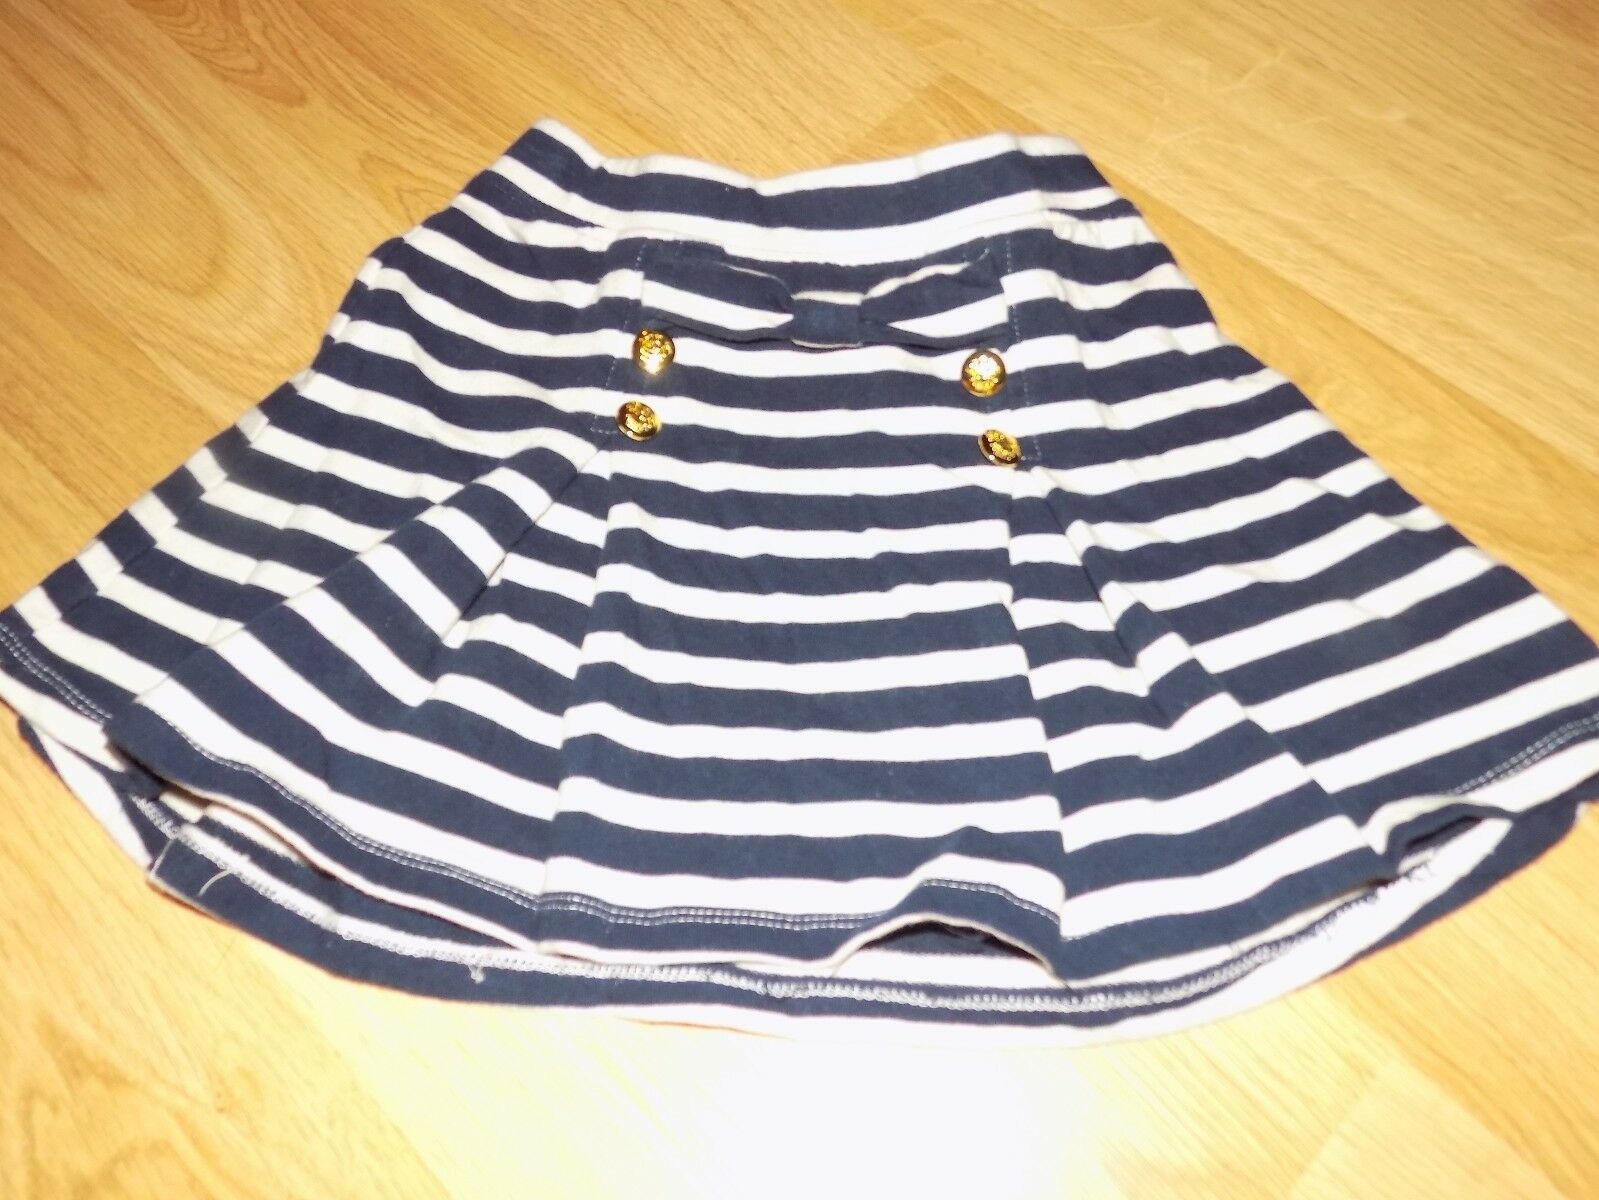 Girl's Size Small 5-6 The Children's Place Navy White Striped Pleated Mini Skirt - $12.00